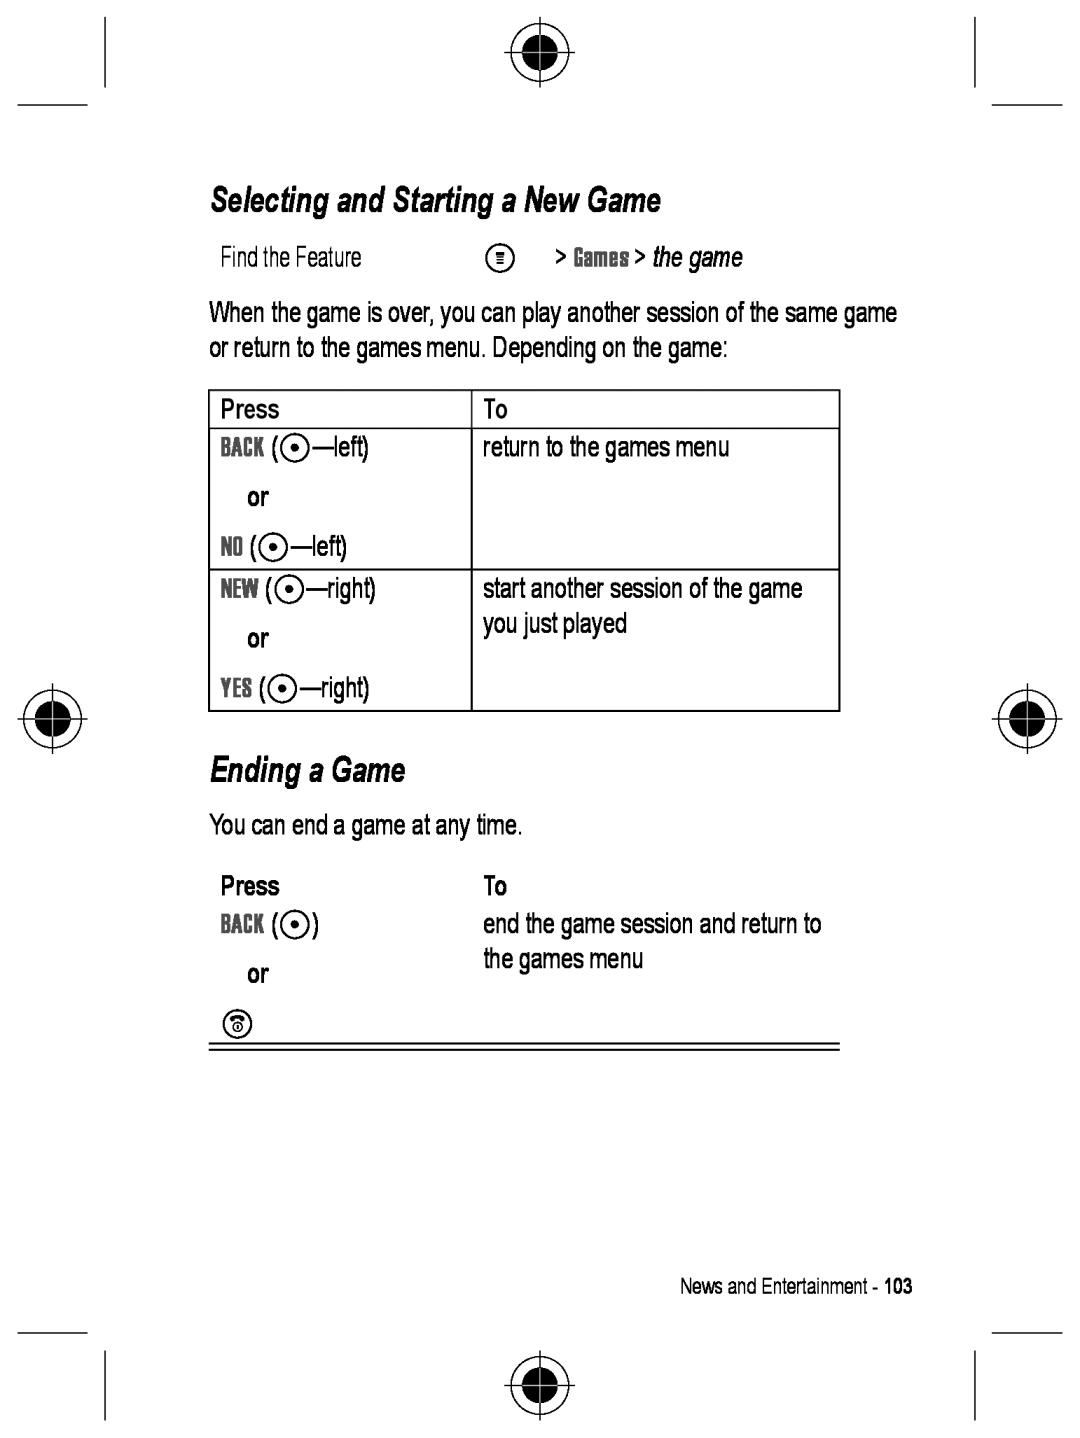 Motorola C330 manual Selecting and Starting a New Game, Ending a Game, M Games the game, Back 